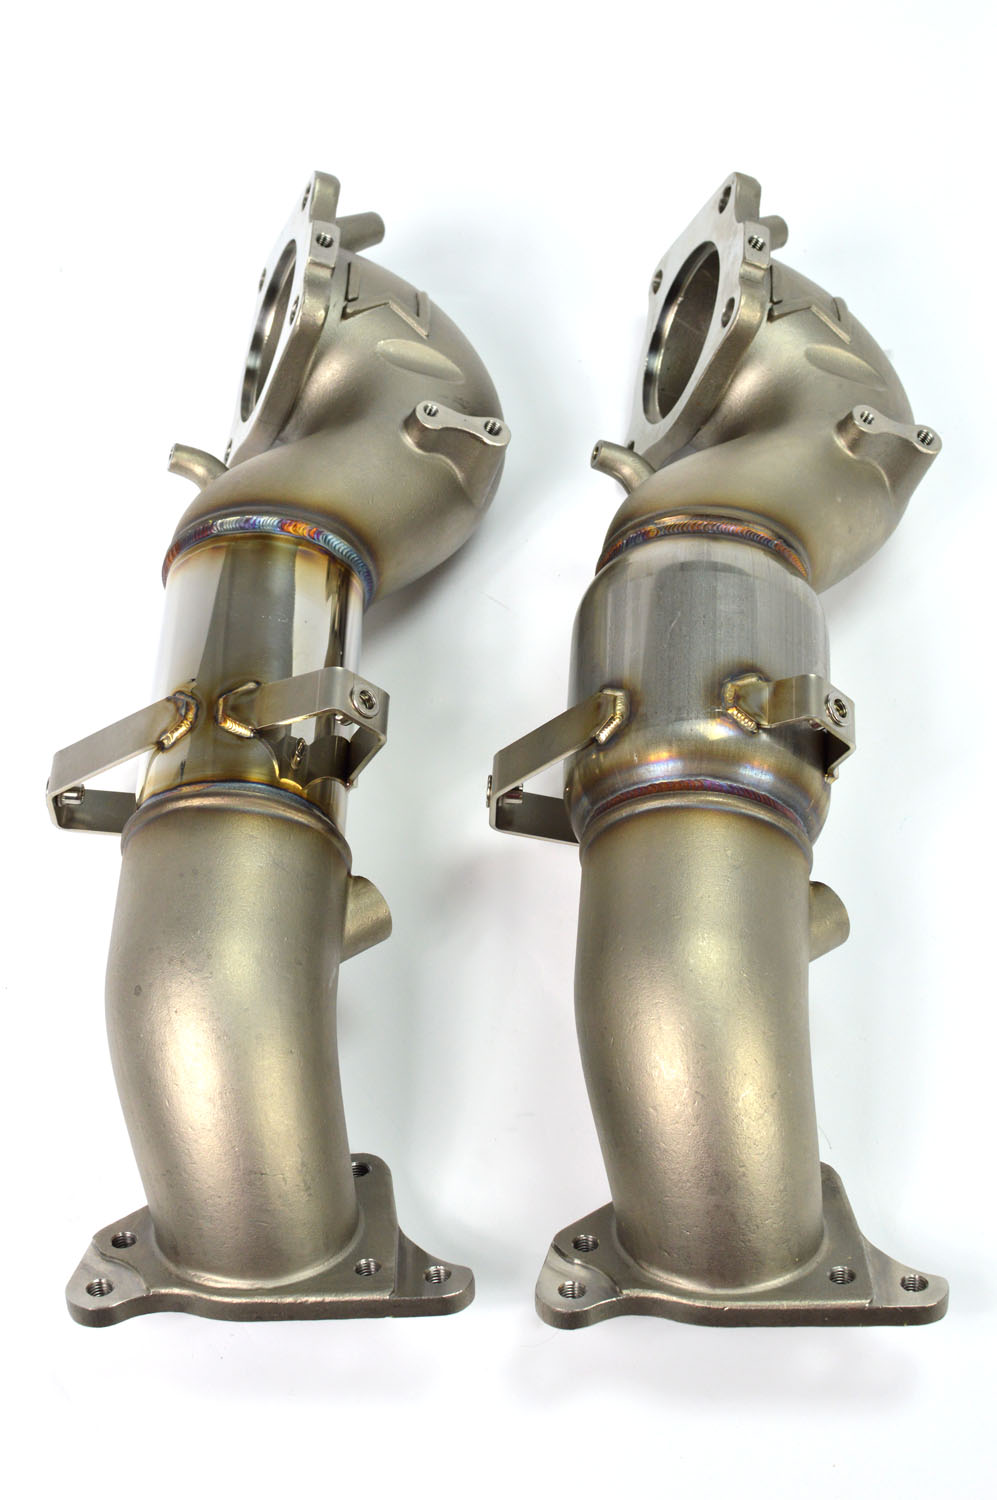 11th Gen Honda Civic 27WON 80mm down-pipe now available CivicX-Performance-Downpipe